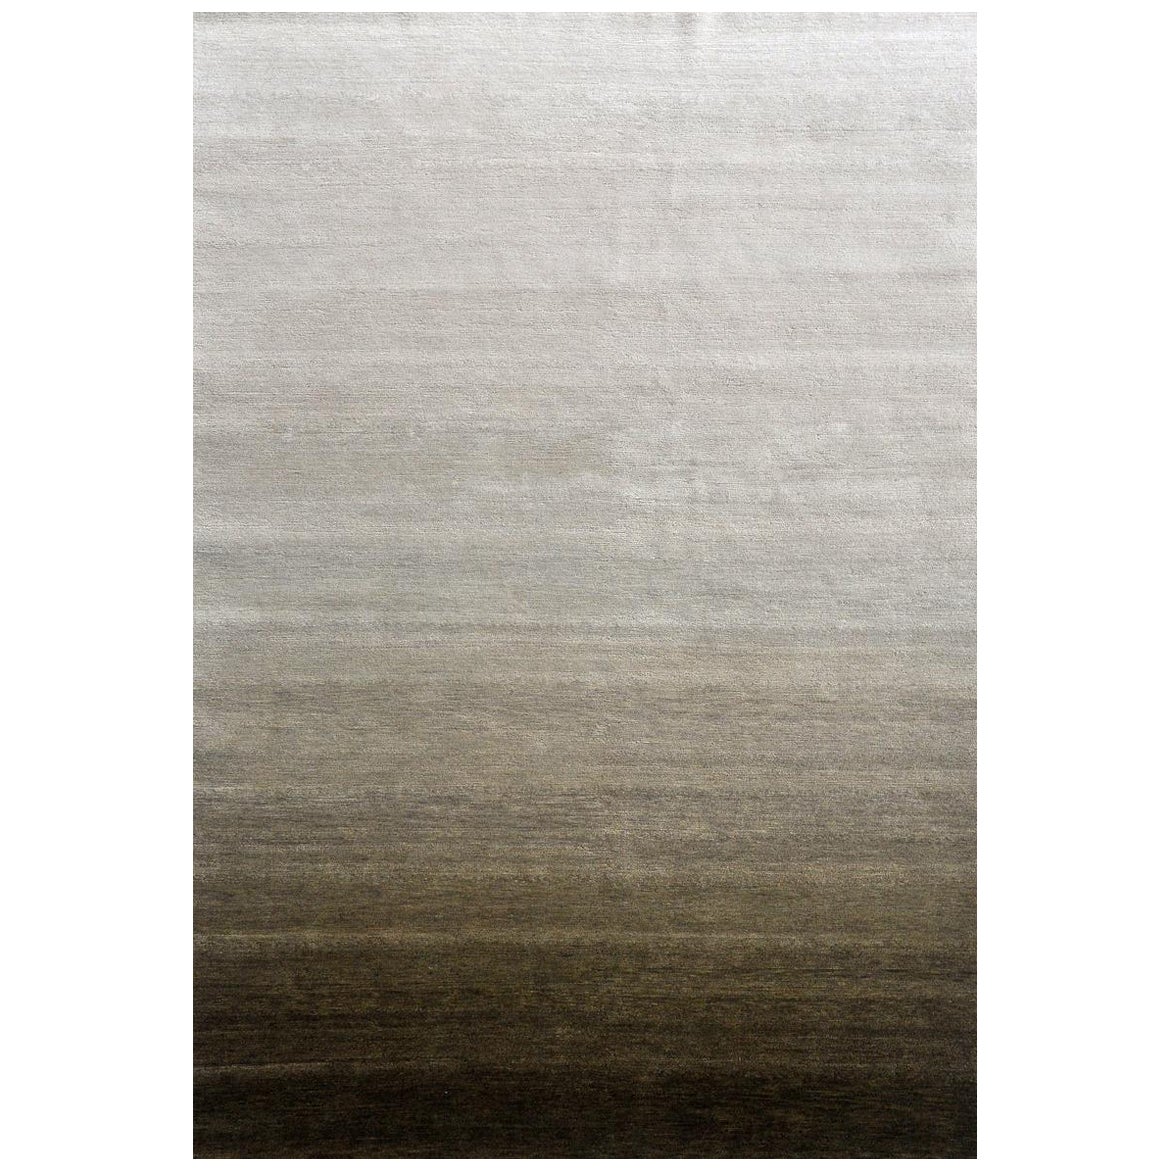 "Fade - Olive + Cream" /  6' x 9' / Hand-Knotted Wool Rug